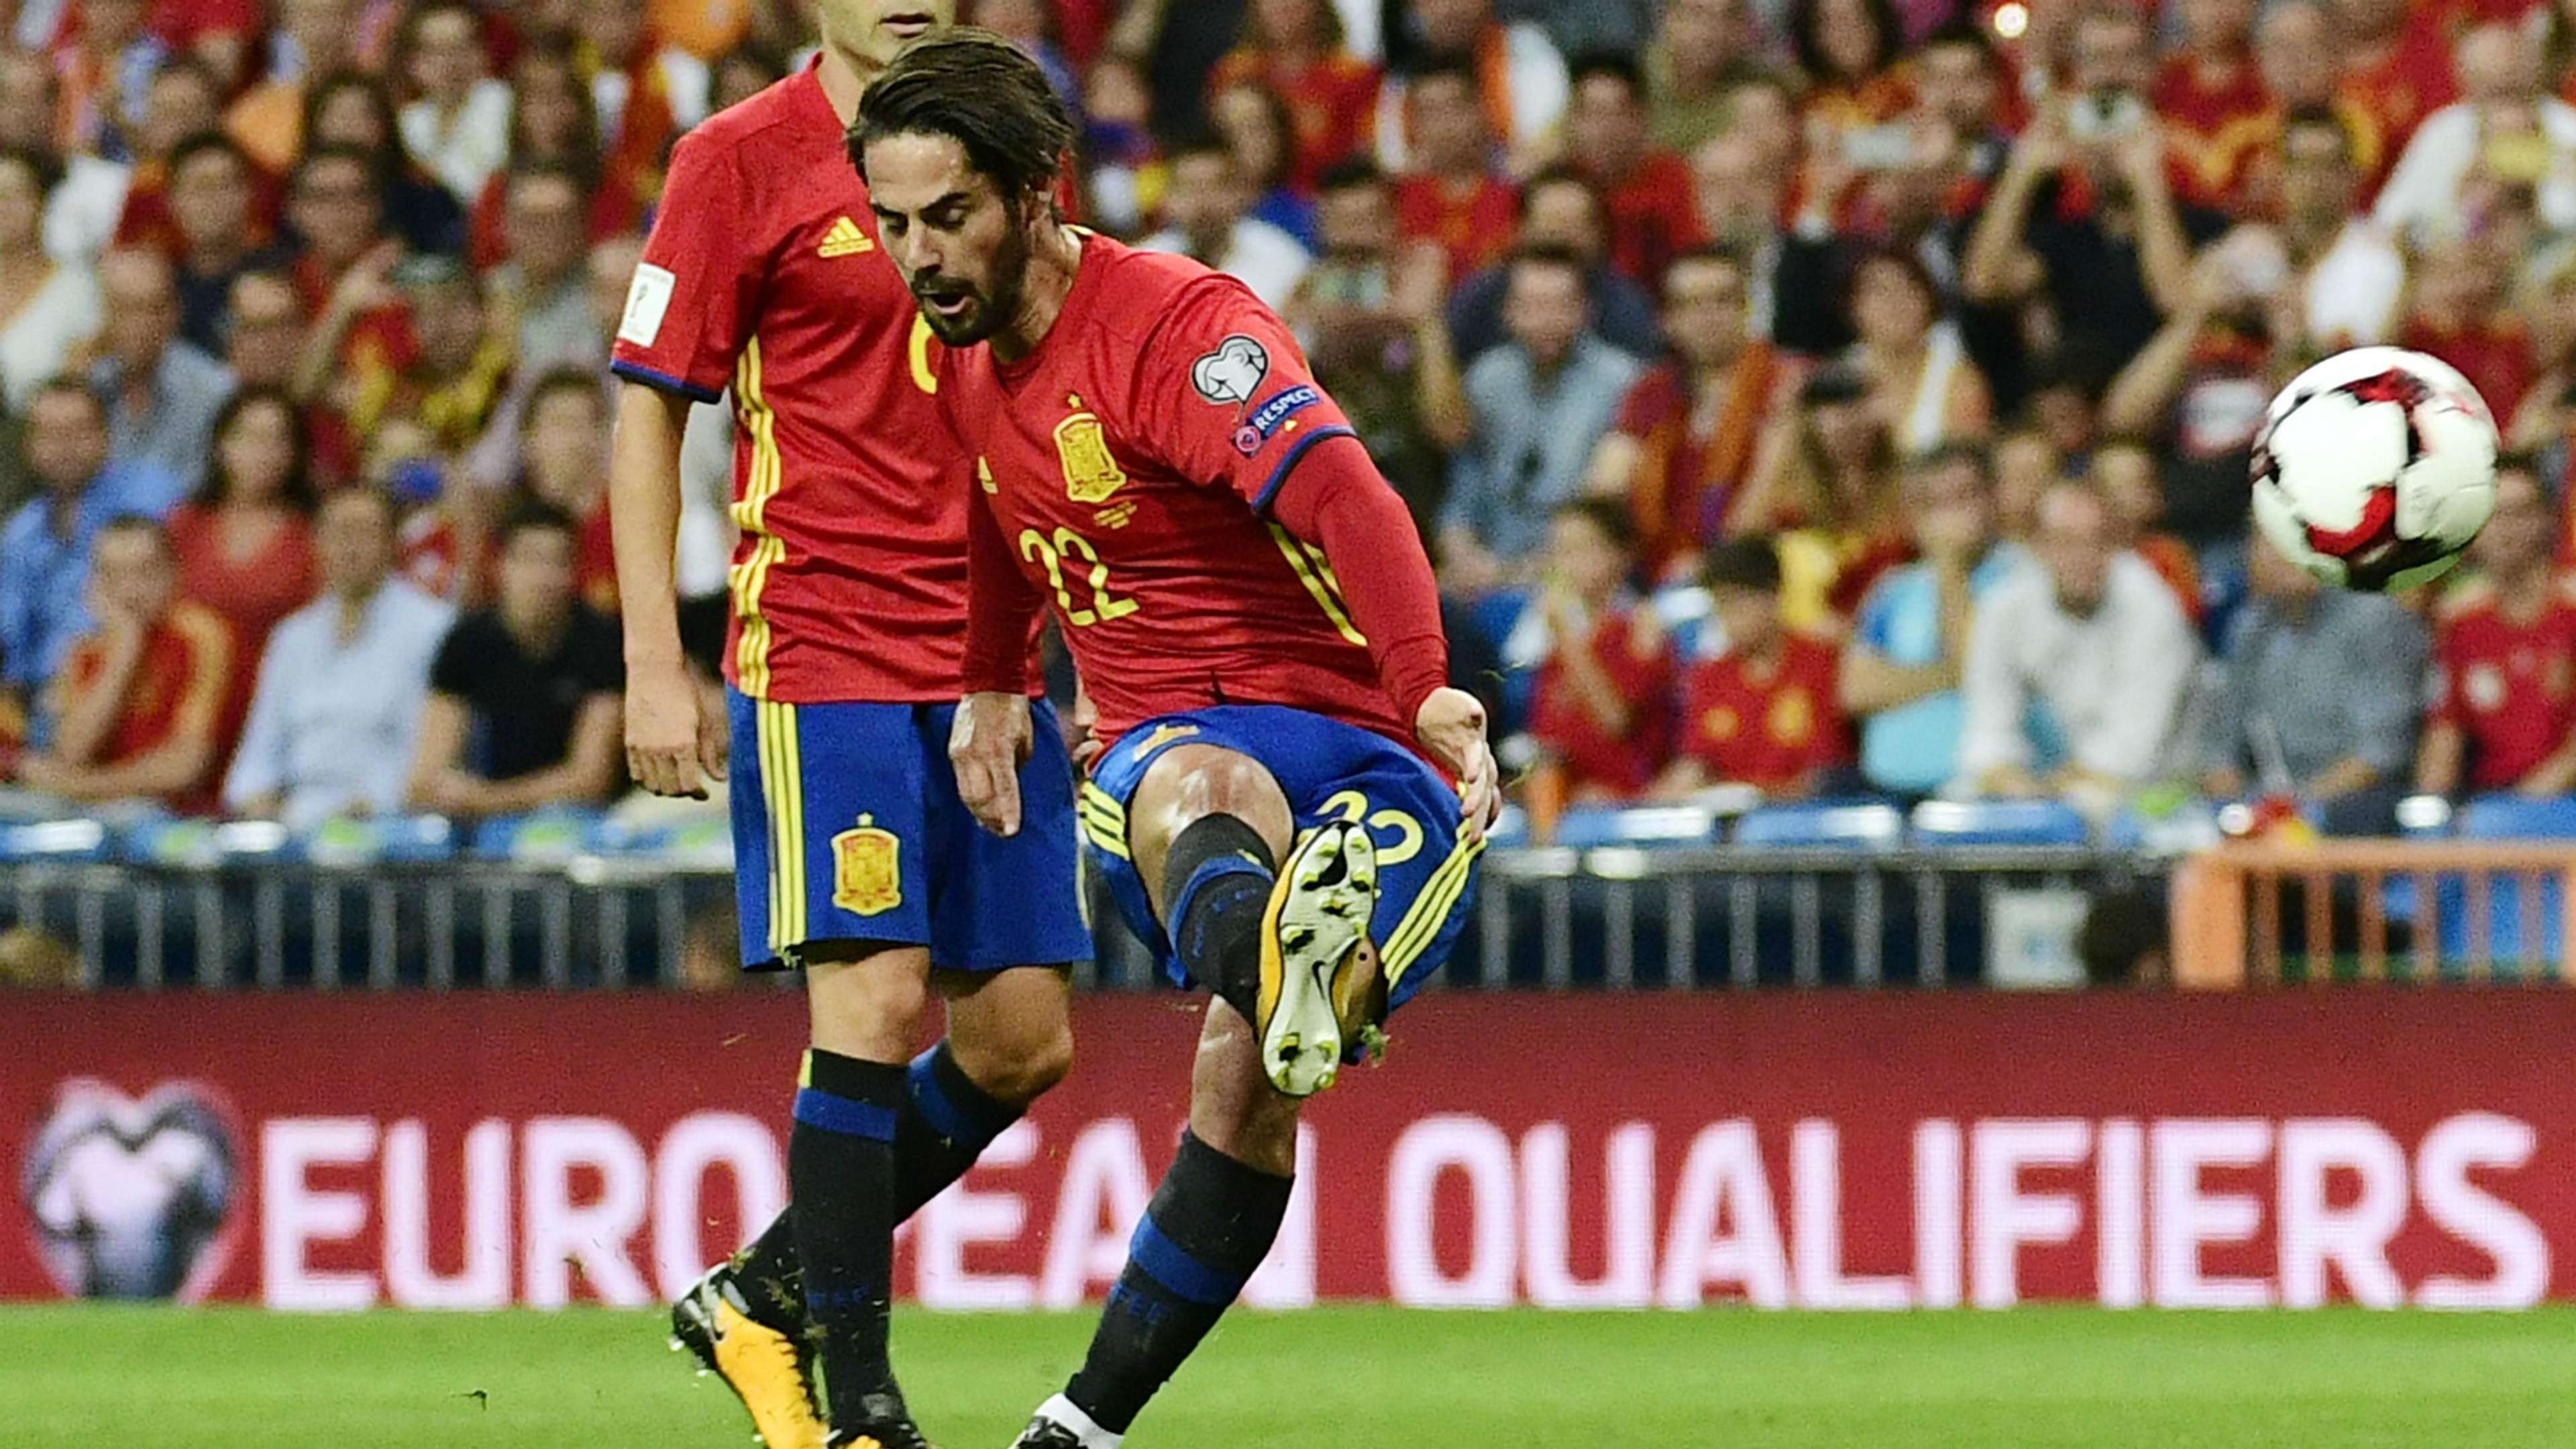 isco Alarcon Spain Italy WC Qualifiers